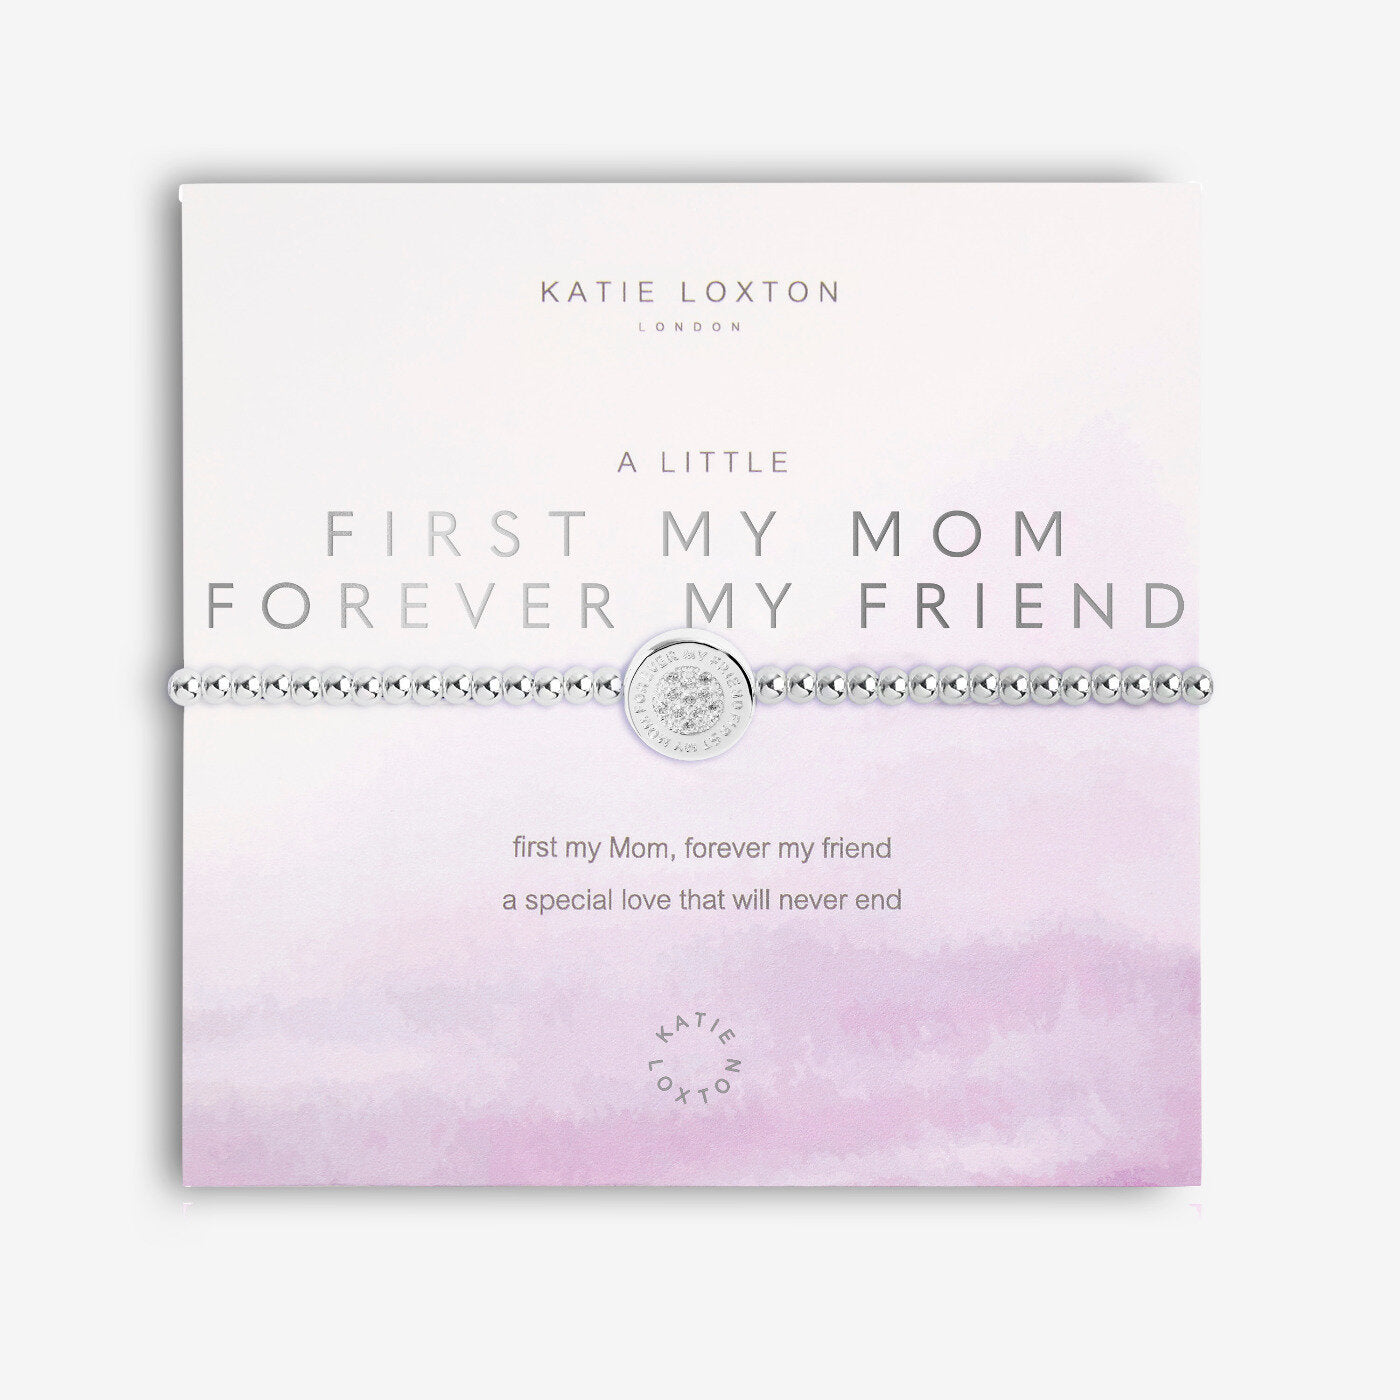 Katie Loxton A Little 'First My Mom Forever My Friend' Bracelet